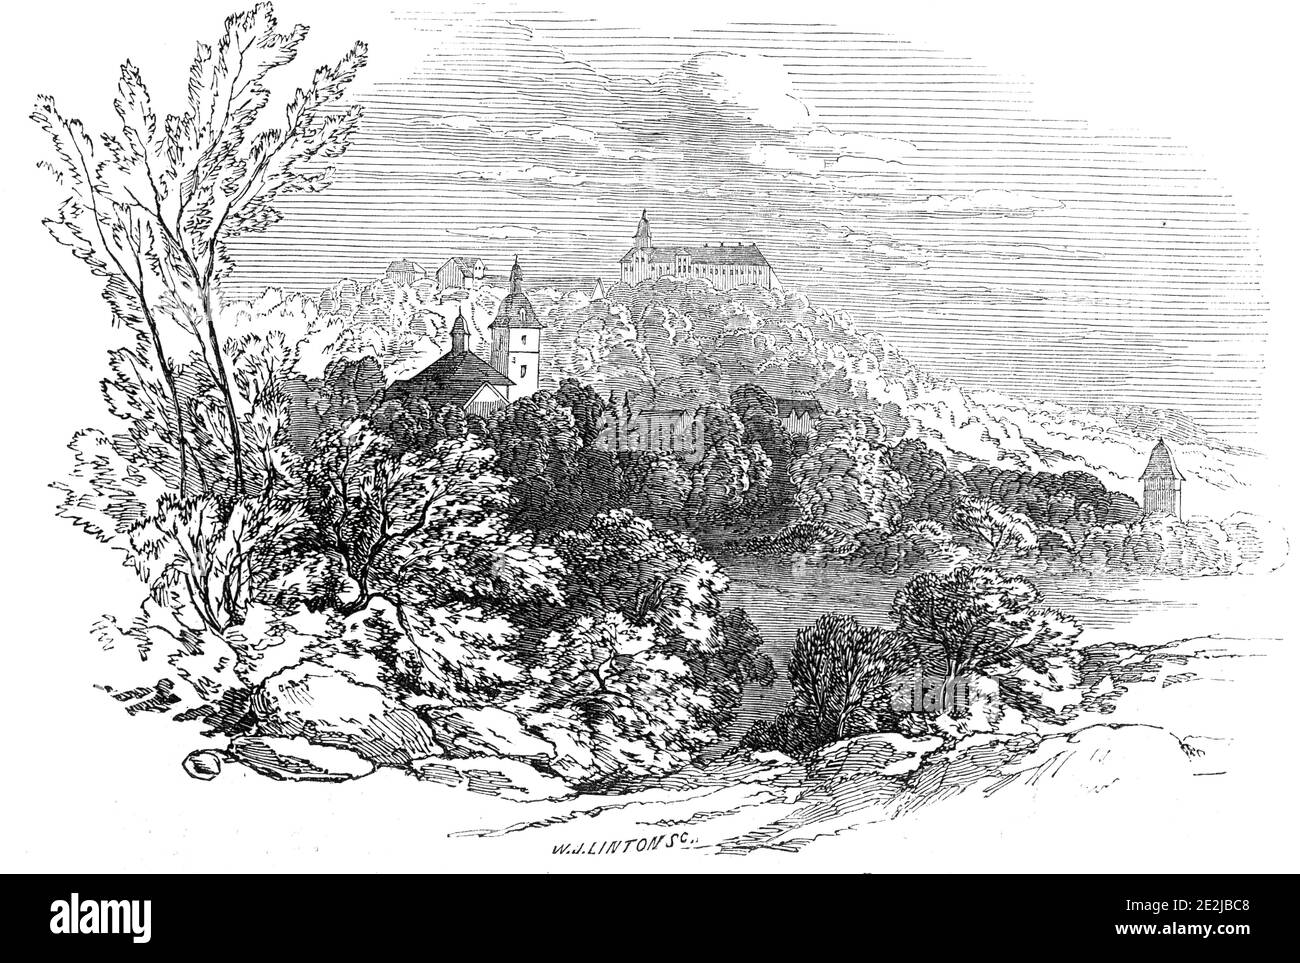 Palace of Molsdorf - from His Royal Highness Prince Albert's drawing, 1845. View of Molsdorf Palace, near Gotha in Germany. From &quot;Illustrated London News&quot;, 1845, Vol VII. Stock Photo